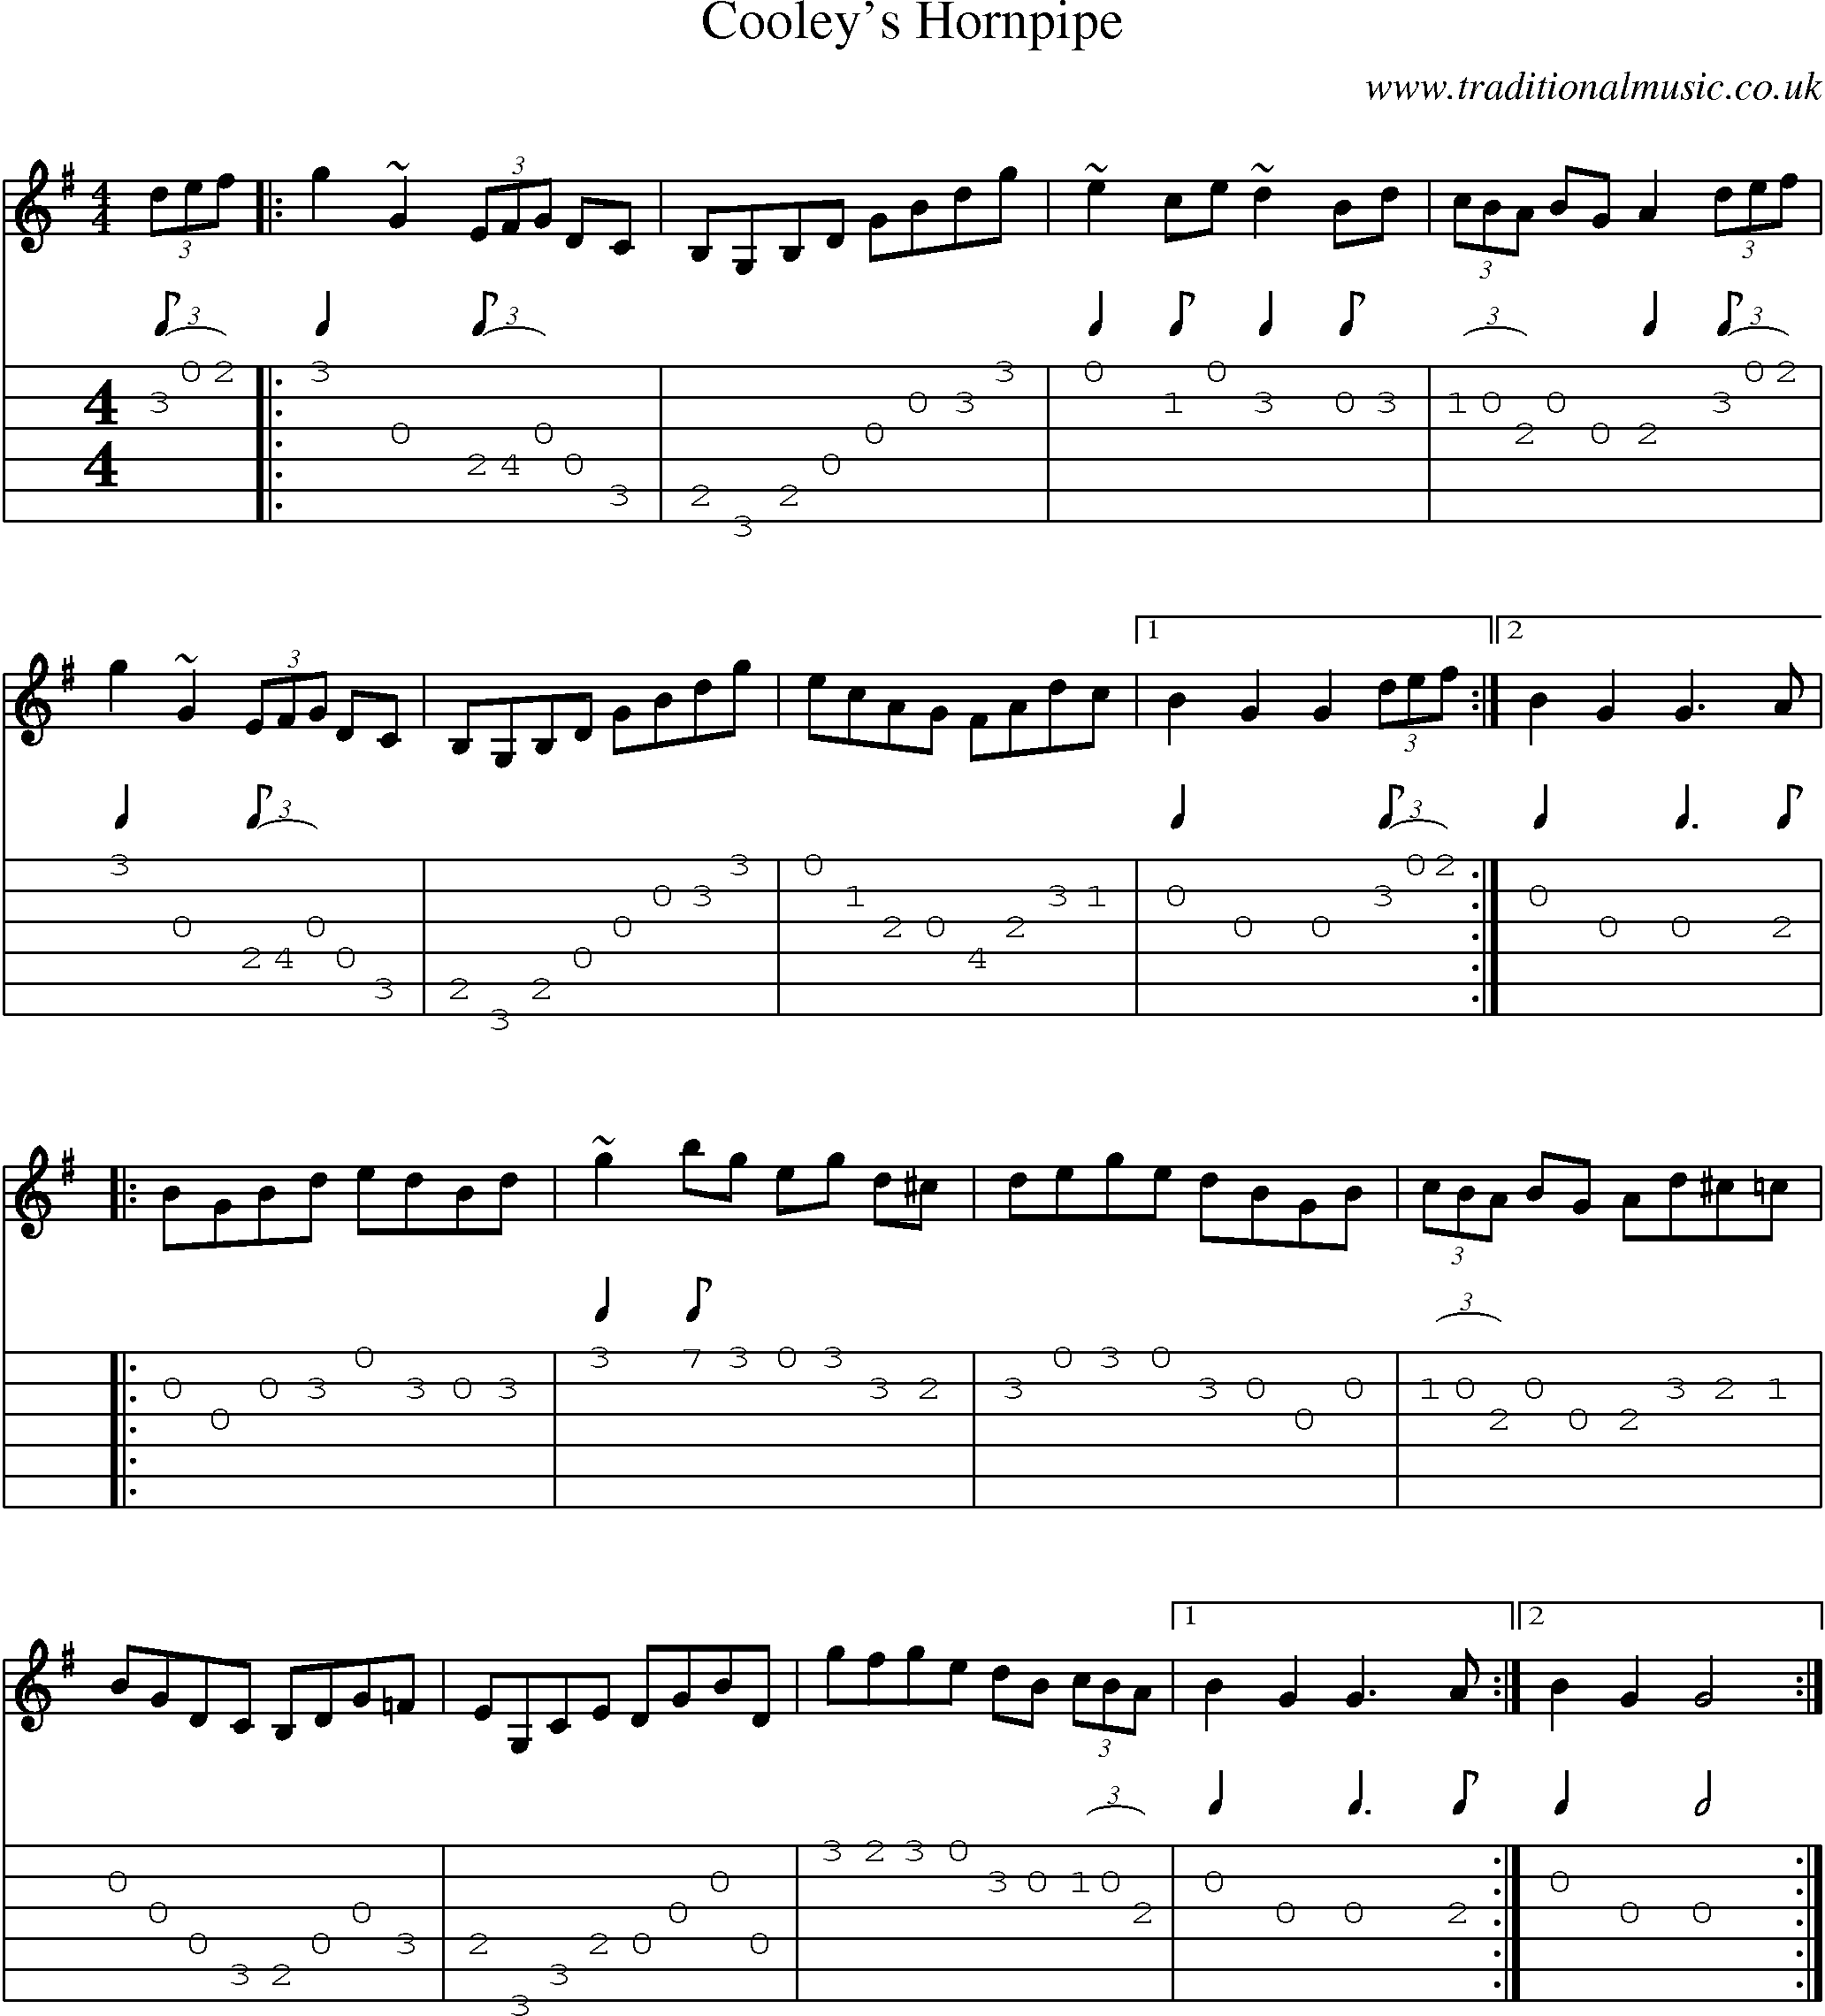 Music Score and Guitar Tabs for Cooleys Hornpipe